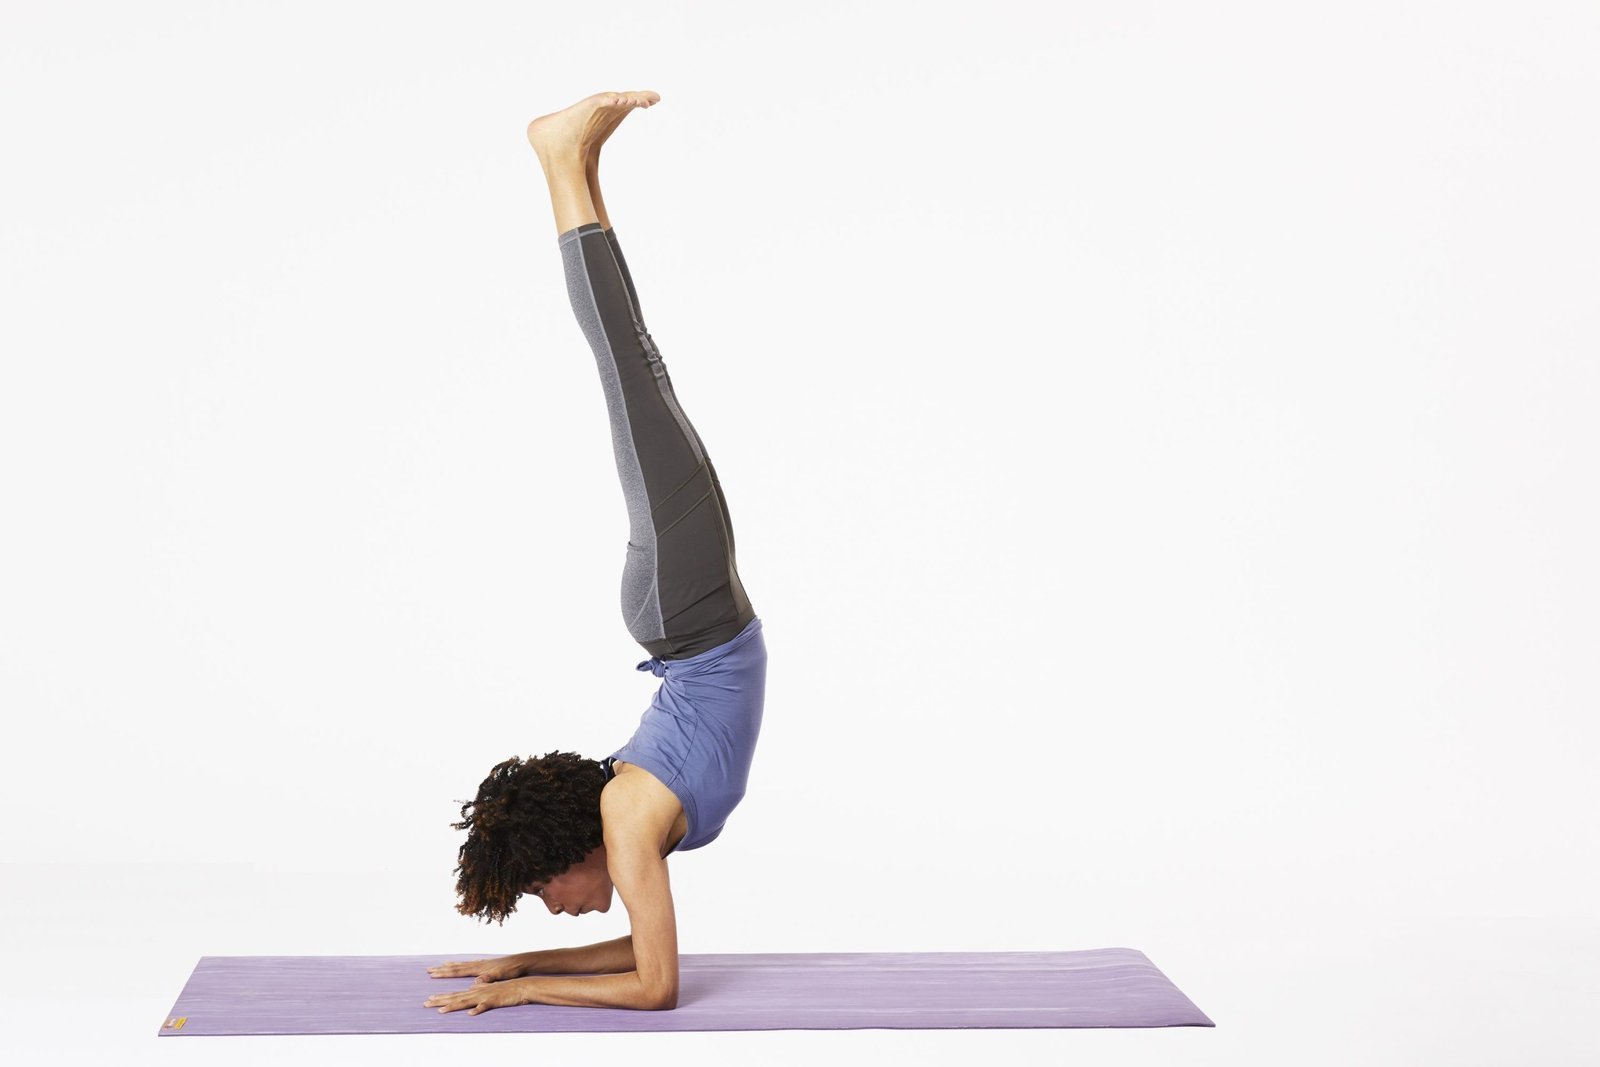 Most Difficult Yoga Poses - Correct Form, Balance